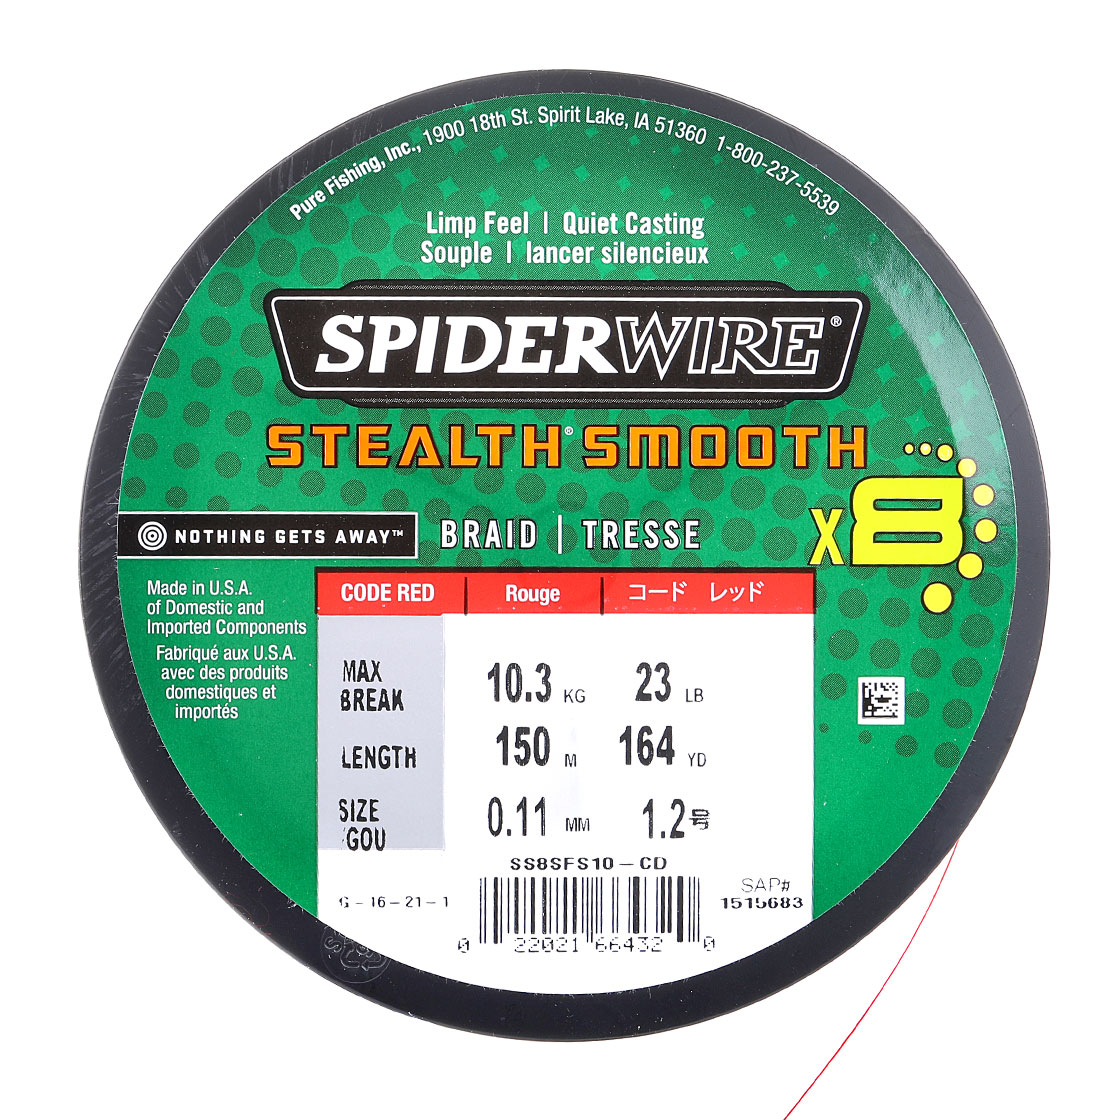 SpiderWire Stealth Smooth x8 300 m Code Red